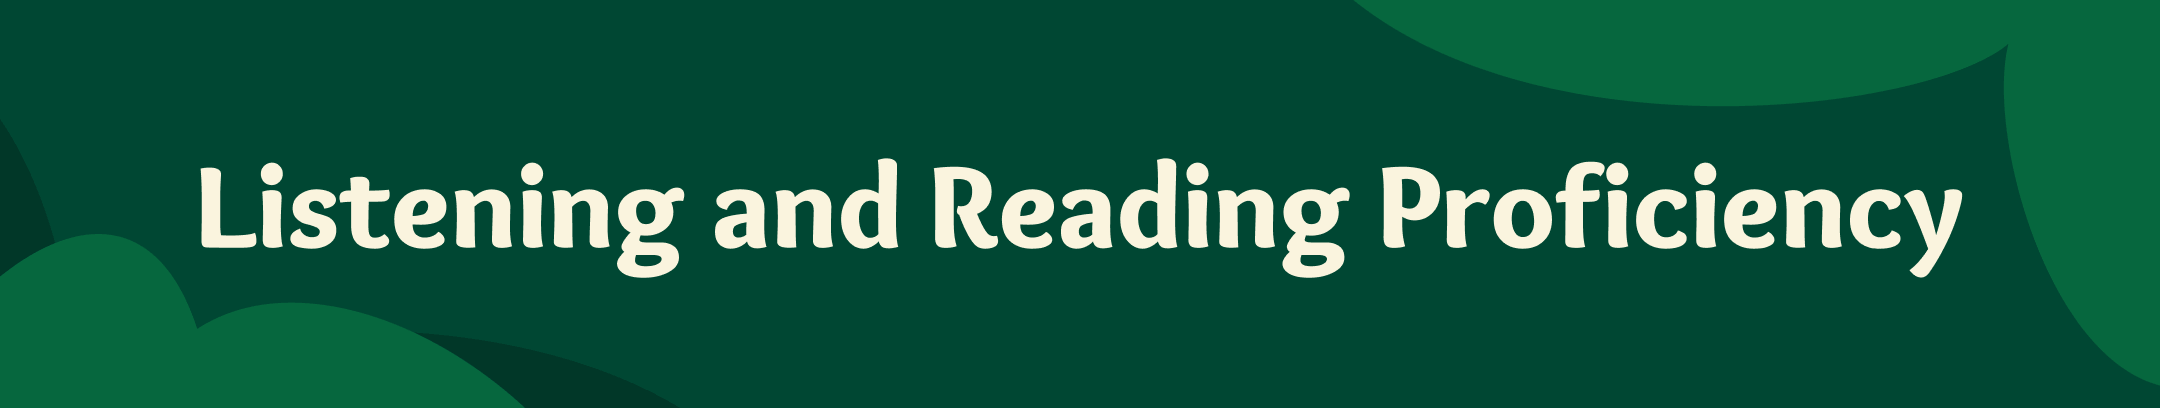 This is a wide banner-like image with a dark green background and the words “Listening and Reading Proficiency” in large, white text centered across the slide.